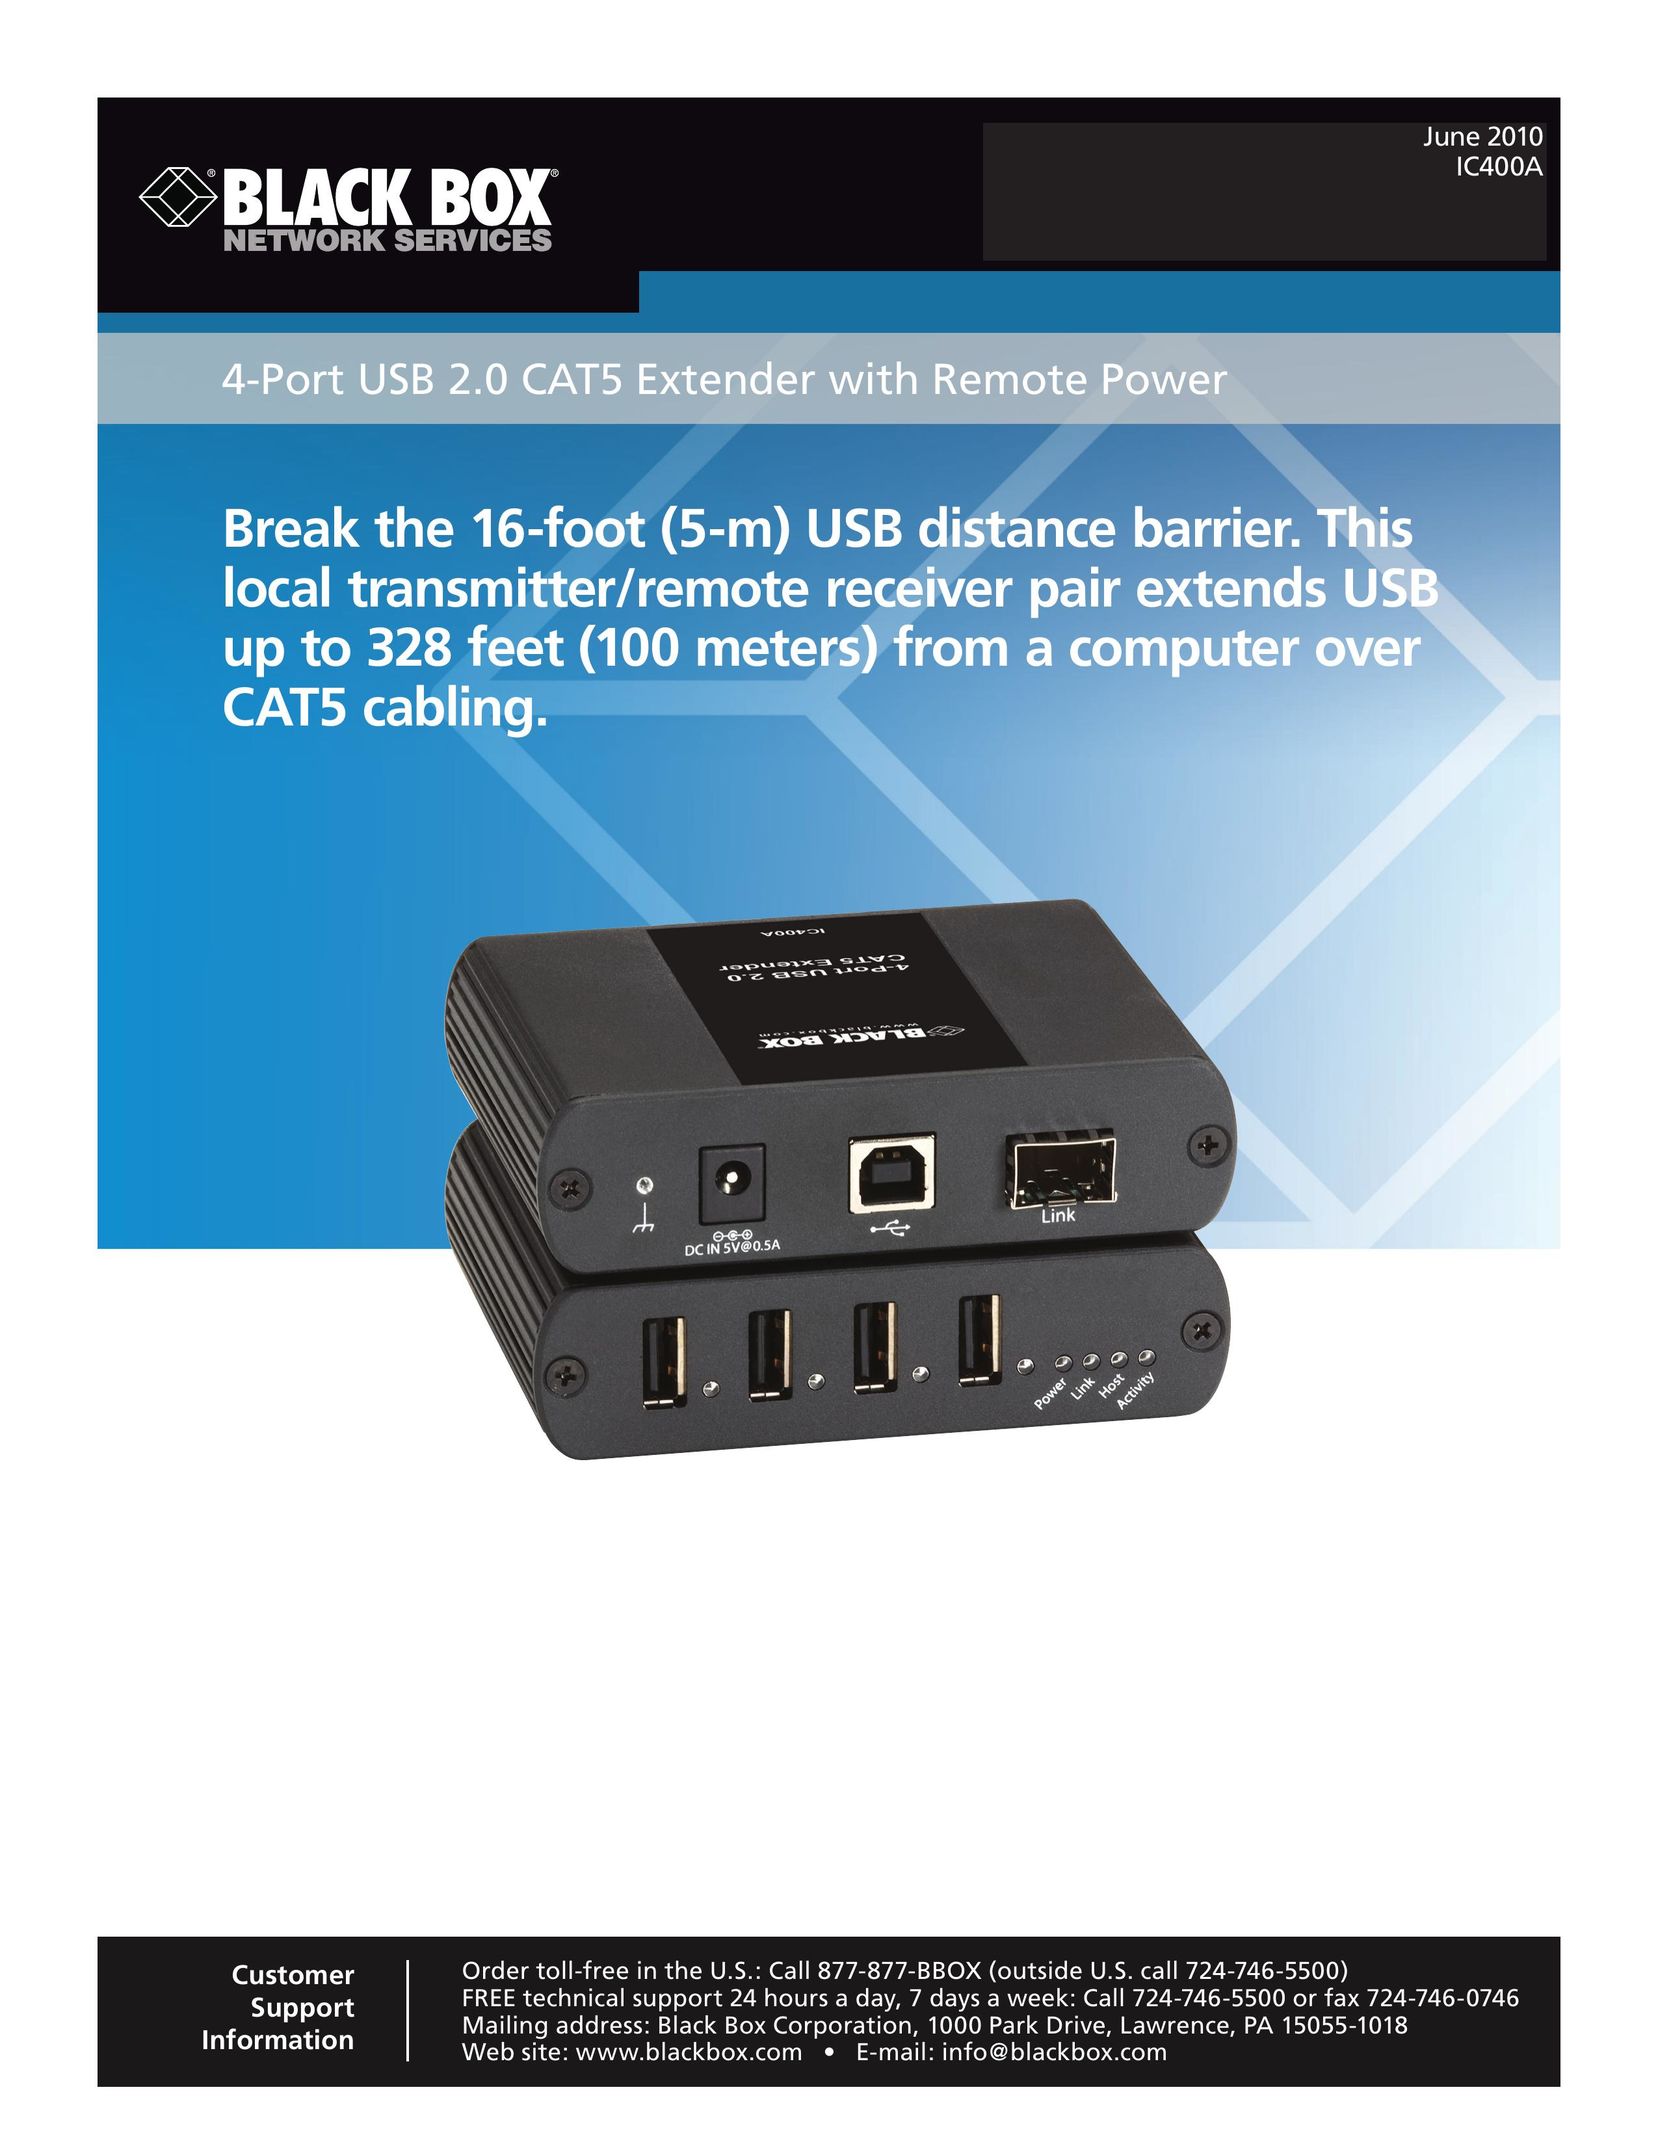 Black Box IC400a Router User Manual